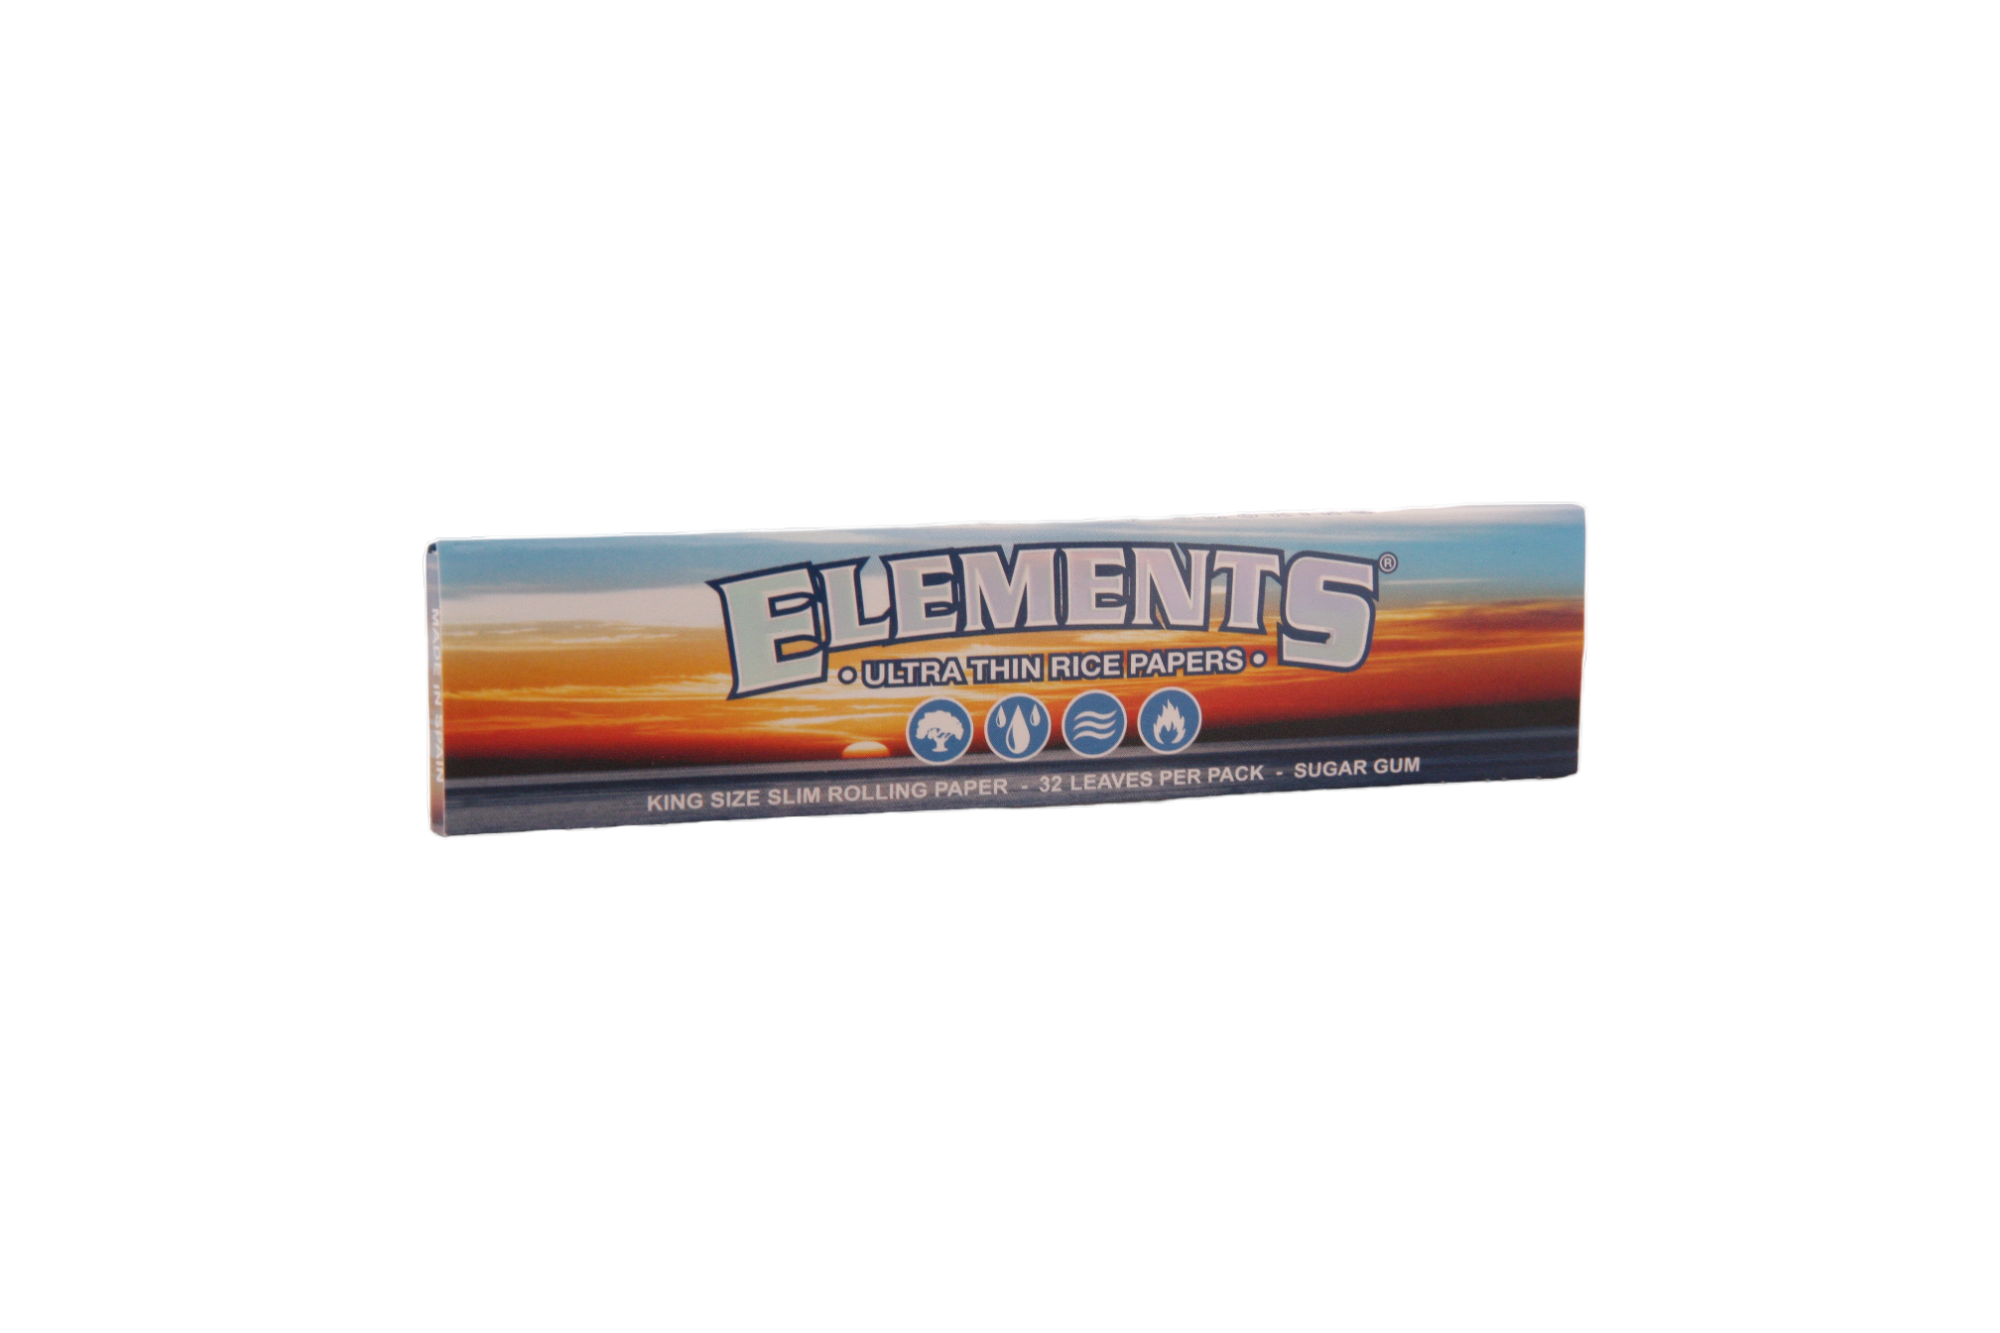 Elements Ultra Thin Rice Papers - King Size